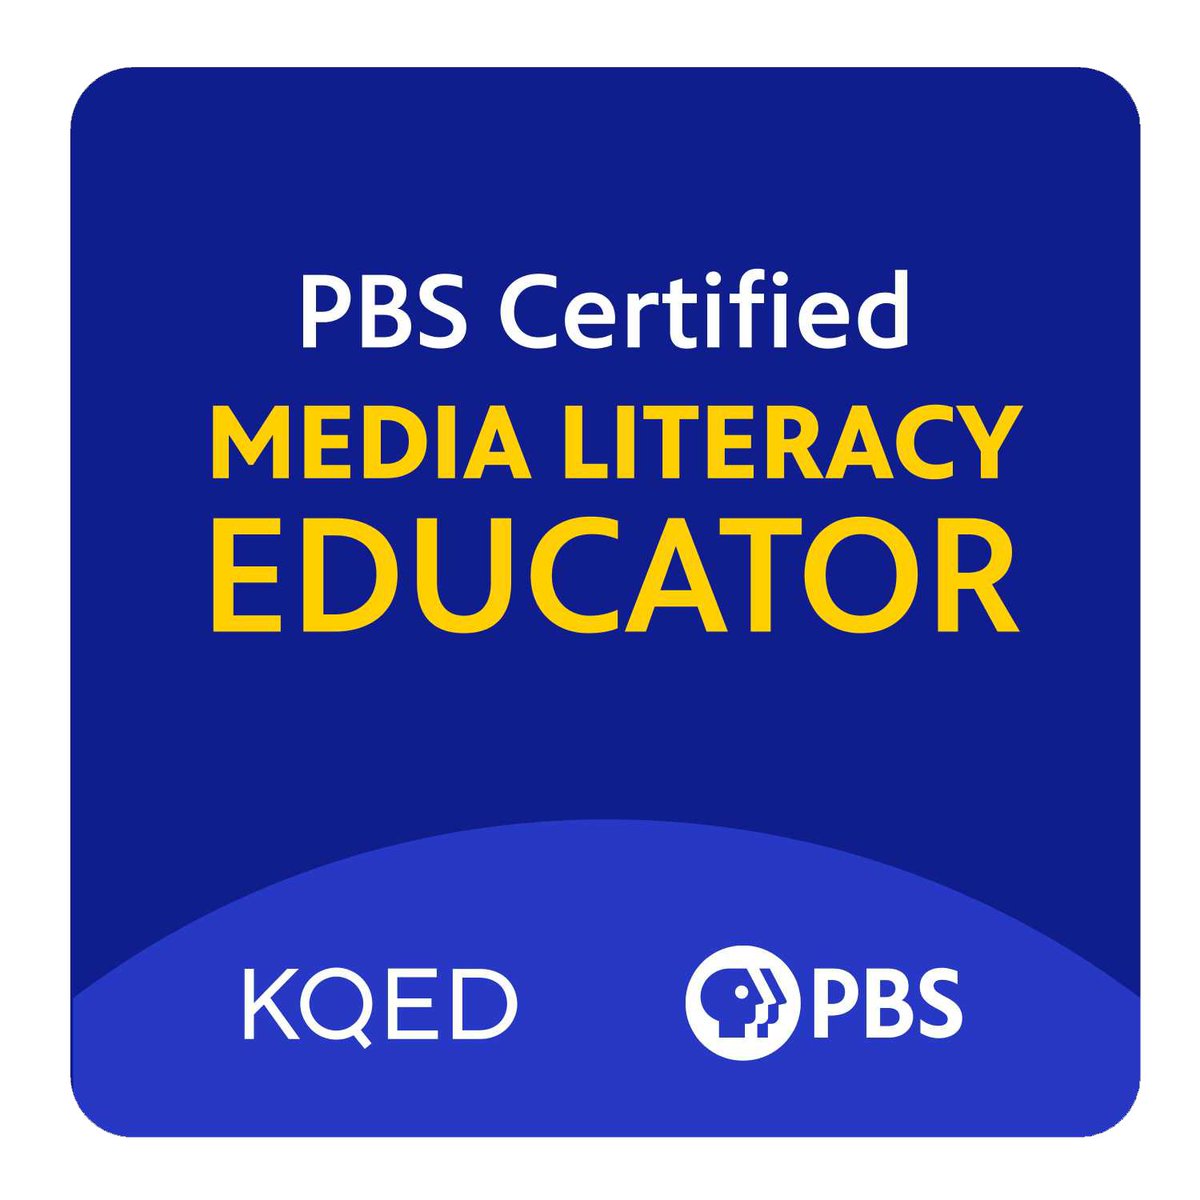 Today we welcomed our 27th PBS Certified #MediaLiteracy Educator : Isabella Hashimoto, an English teacher in San Jose, CA! June has been a huge month, with 5 educators joining the fold. Find out how you can get certified at kqed.org/certification @pbsteachers @KQEDedspace